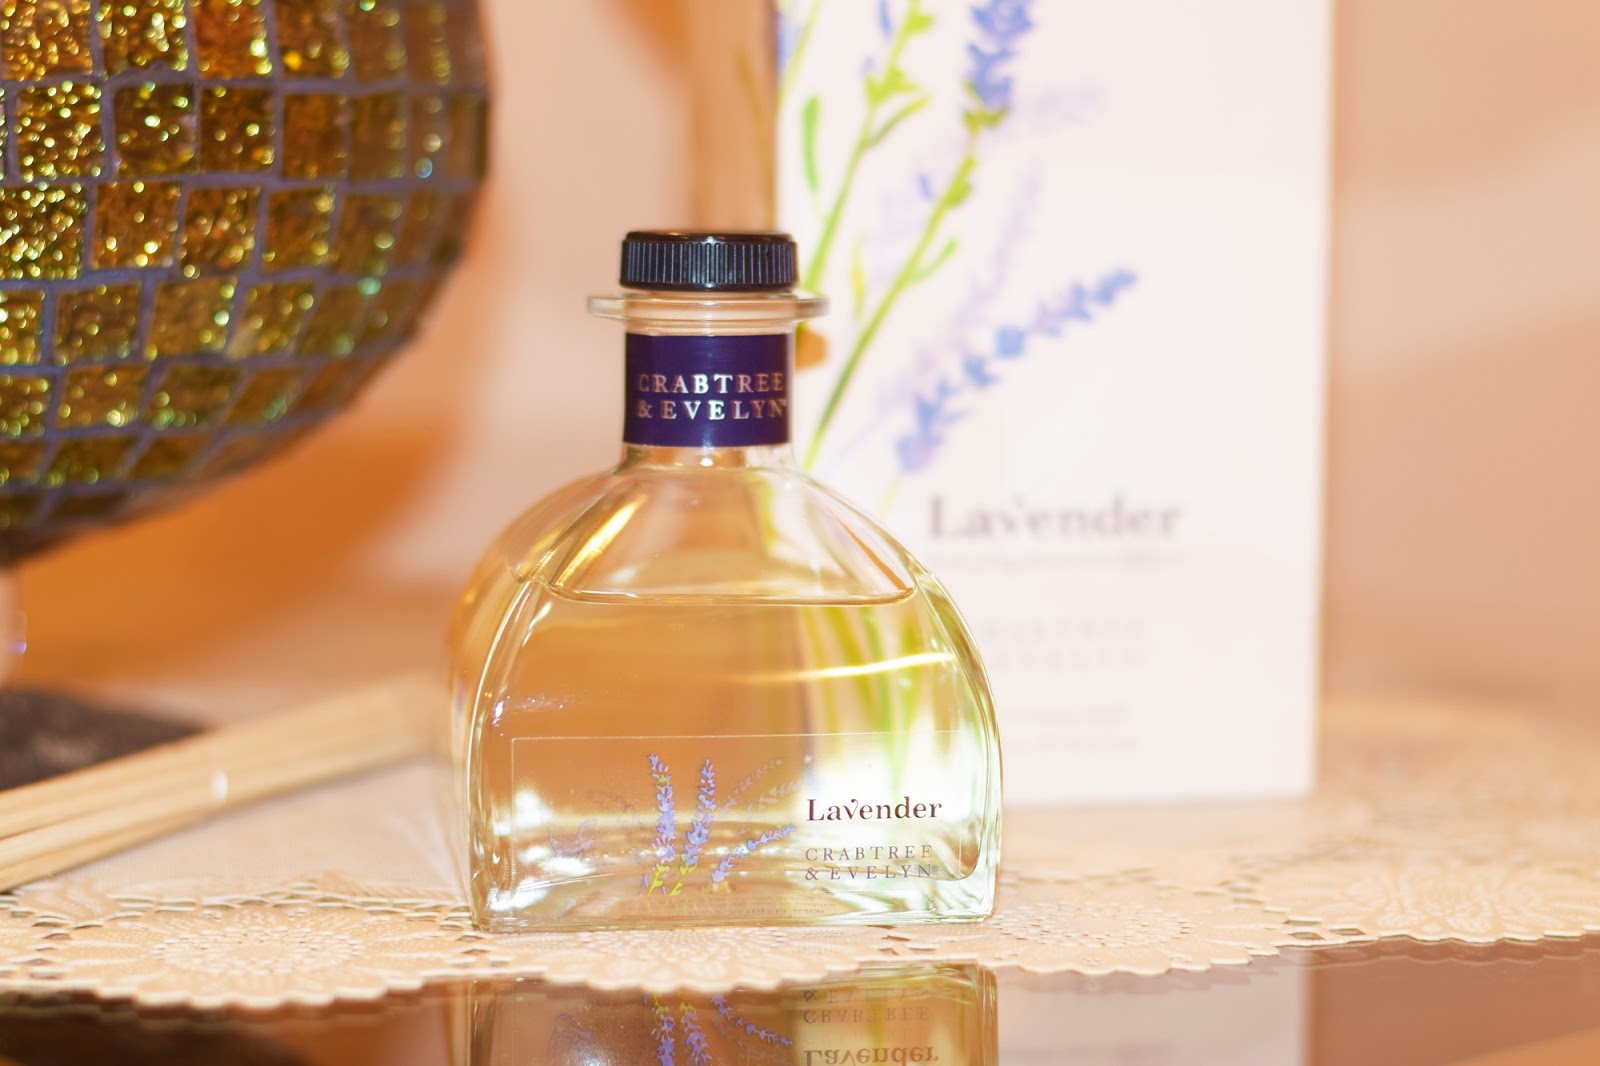 Crabtree & Evelyn Lavender Reed Diffuser